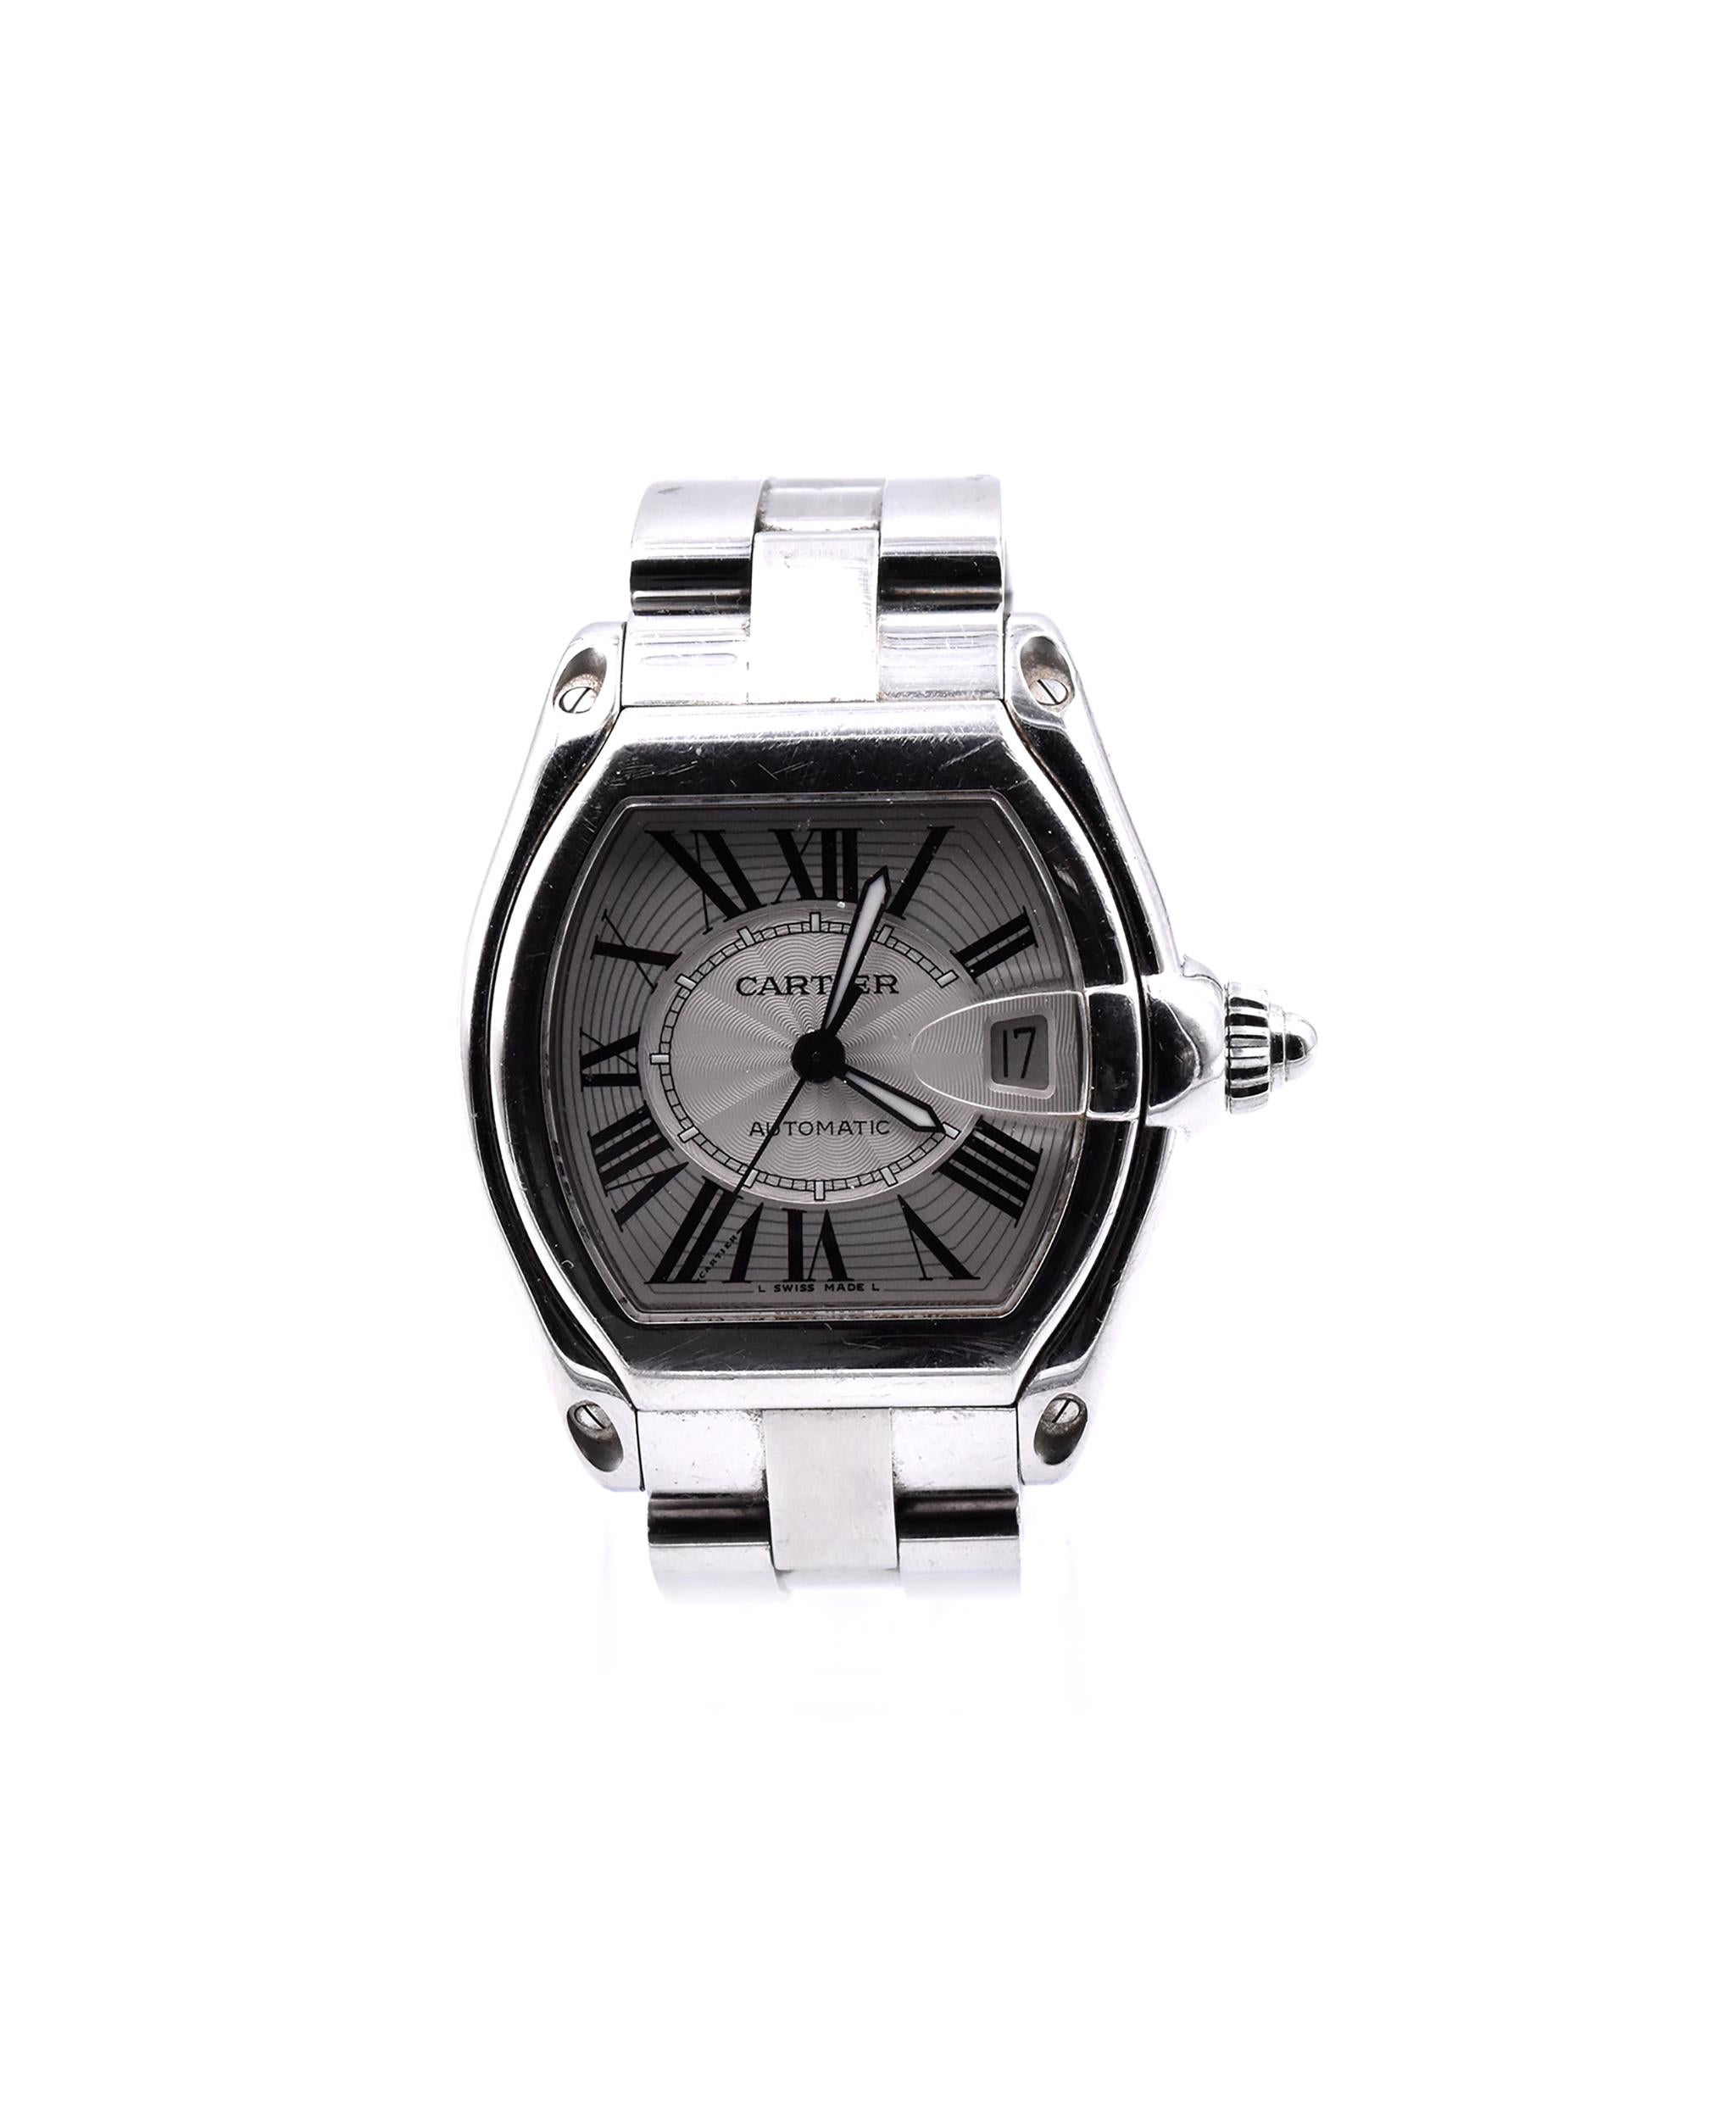 Movement: automatic
Function: hours, minutes, seconds, date, 
Case: 38mm large stainless steel case, push pull crown, sapphire crystal
Dial: white roman dial
Band: stainless steel bracelet
Serial #: 22684XXX
Reference: 2510

No box or